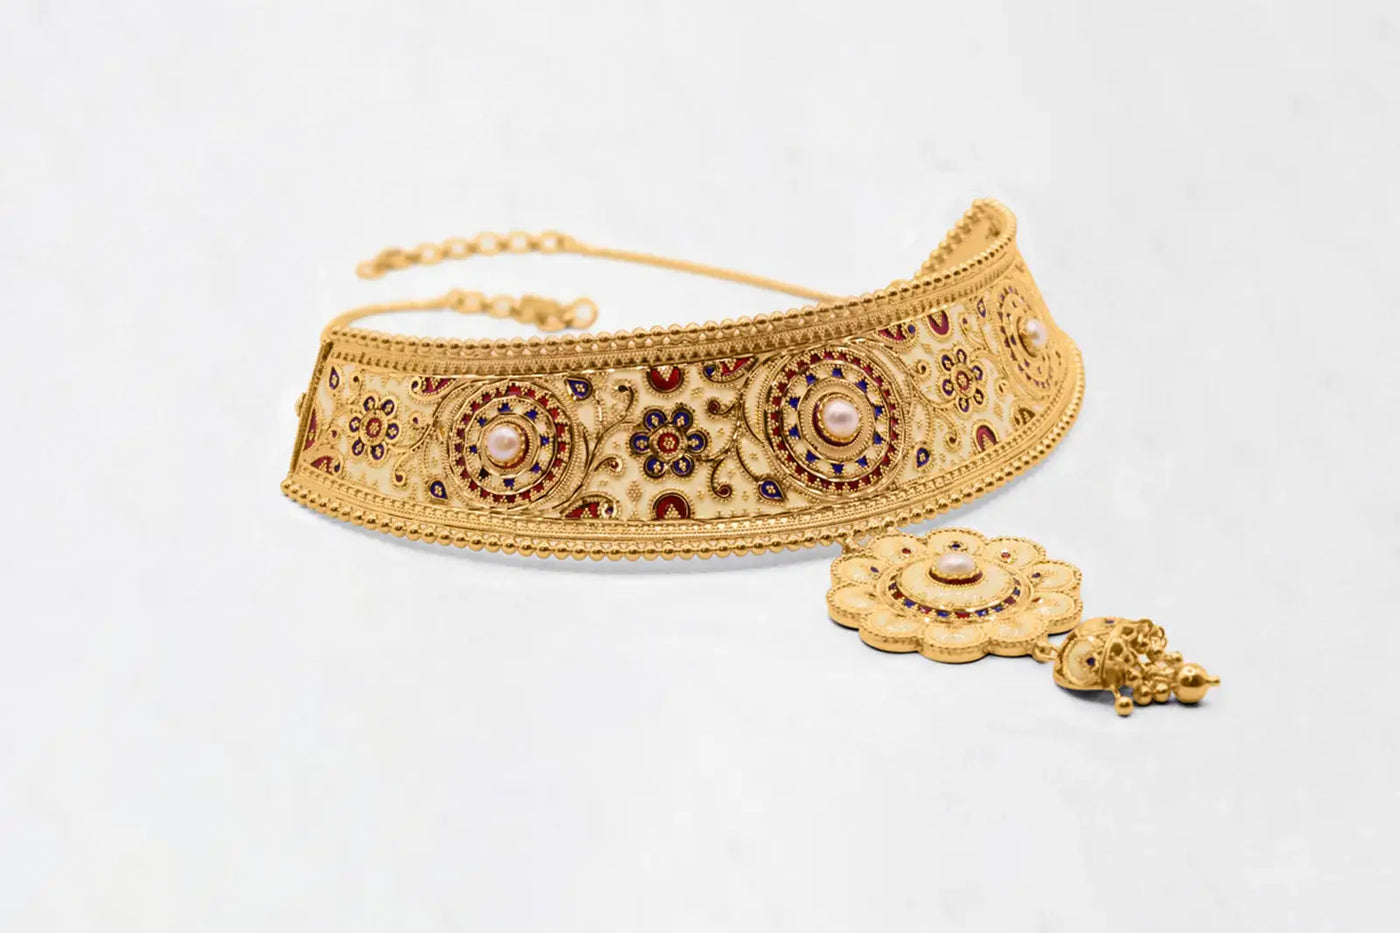 22kt gold indian meenakari and pearl choker necklace